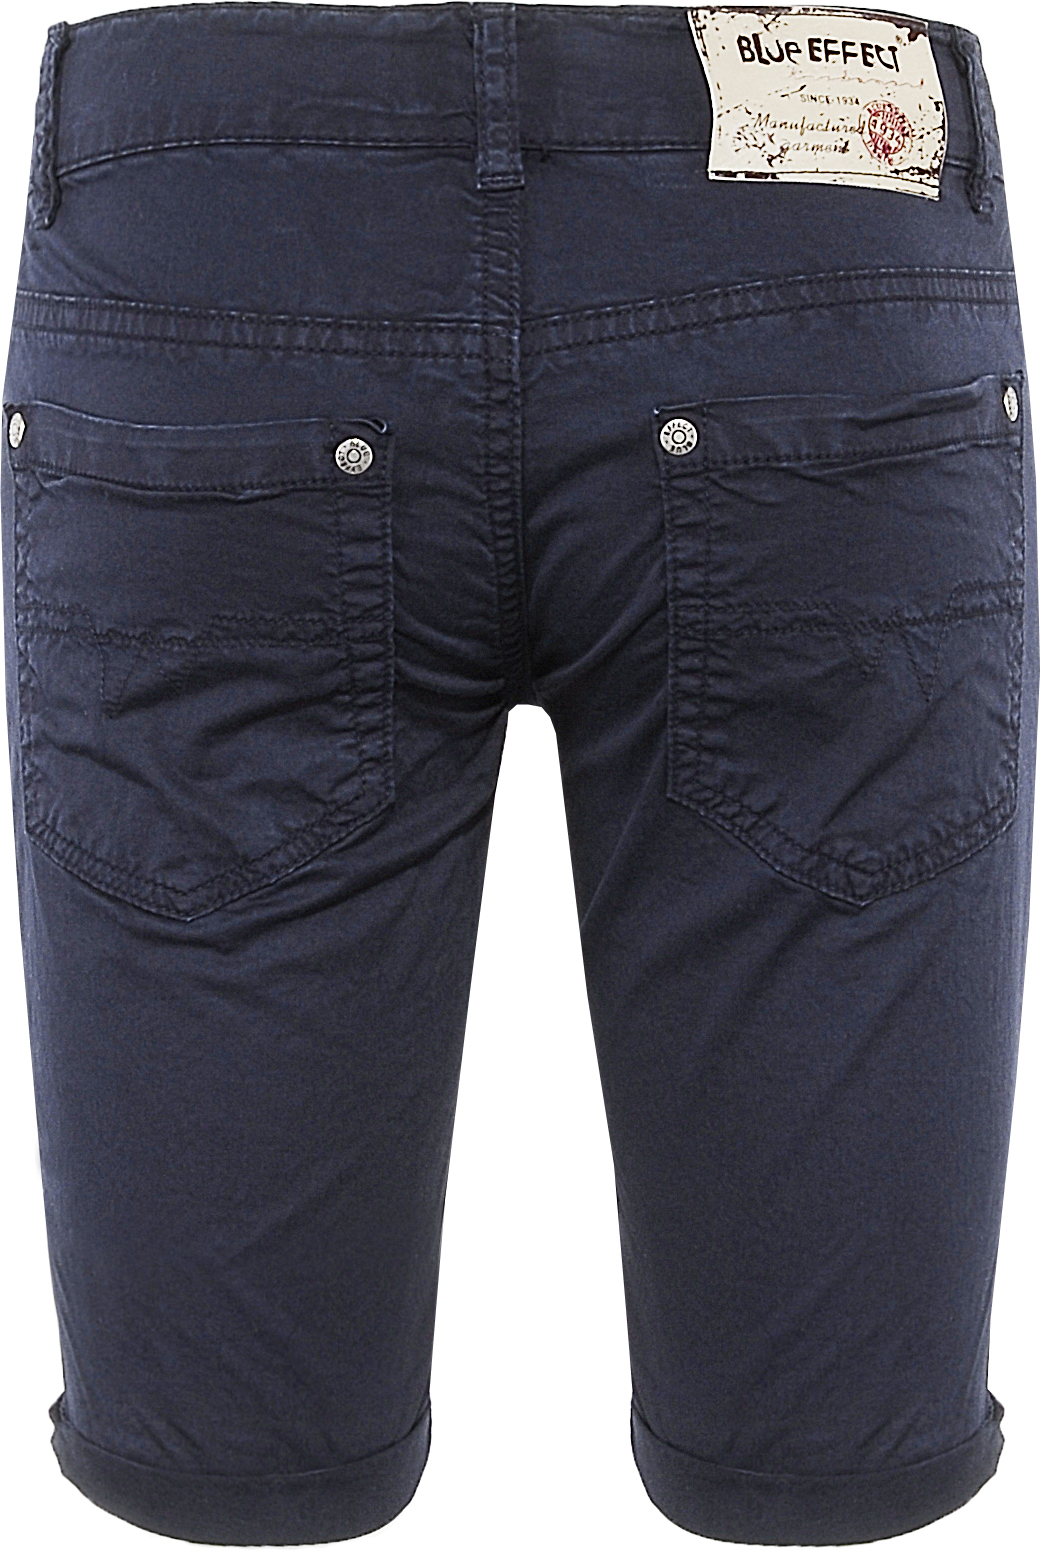 4273-Boys Short available in Slim,Normal,Wide